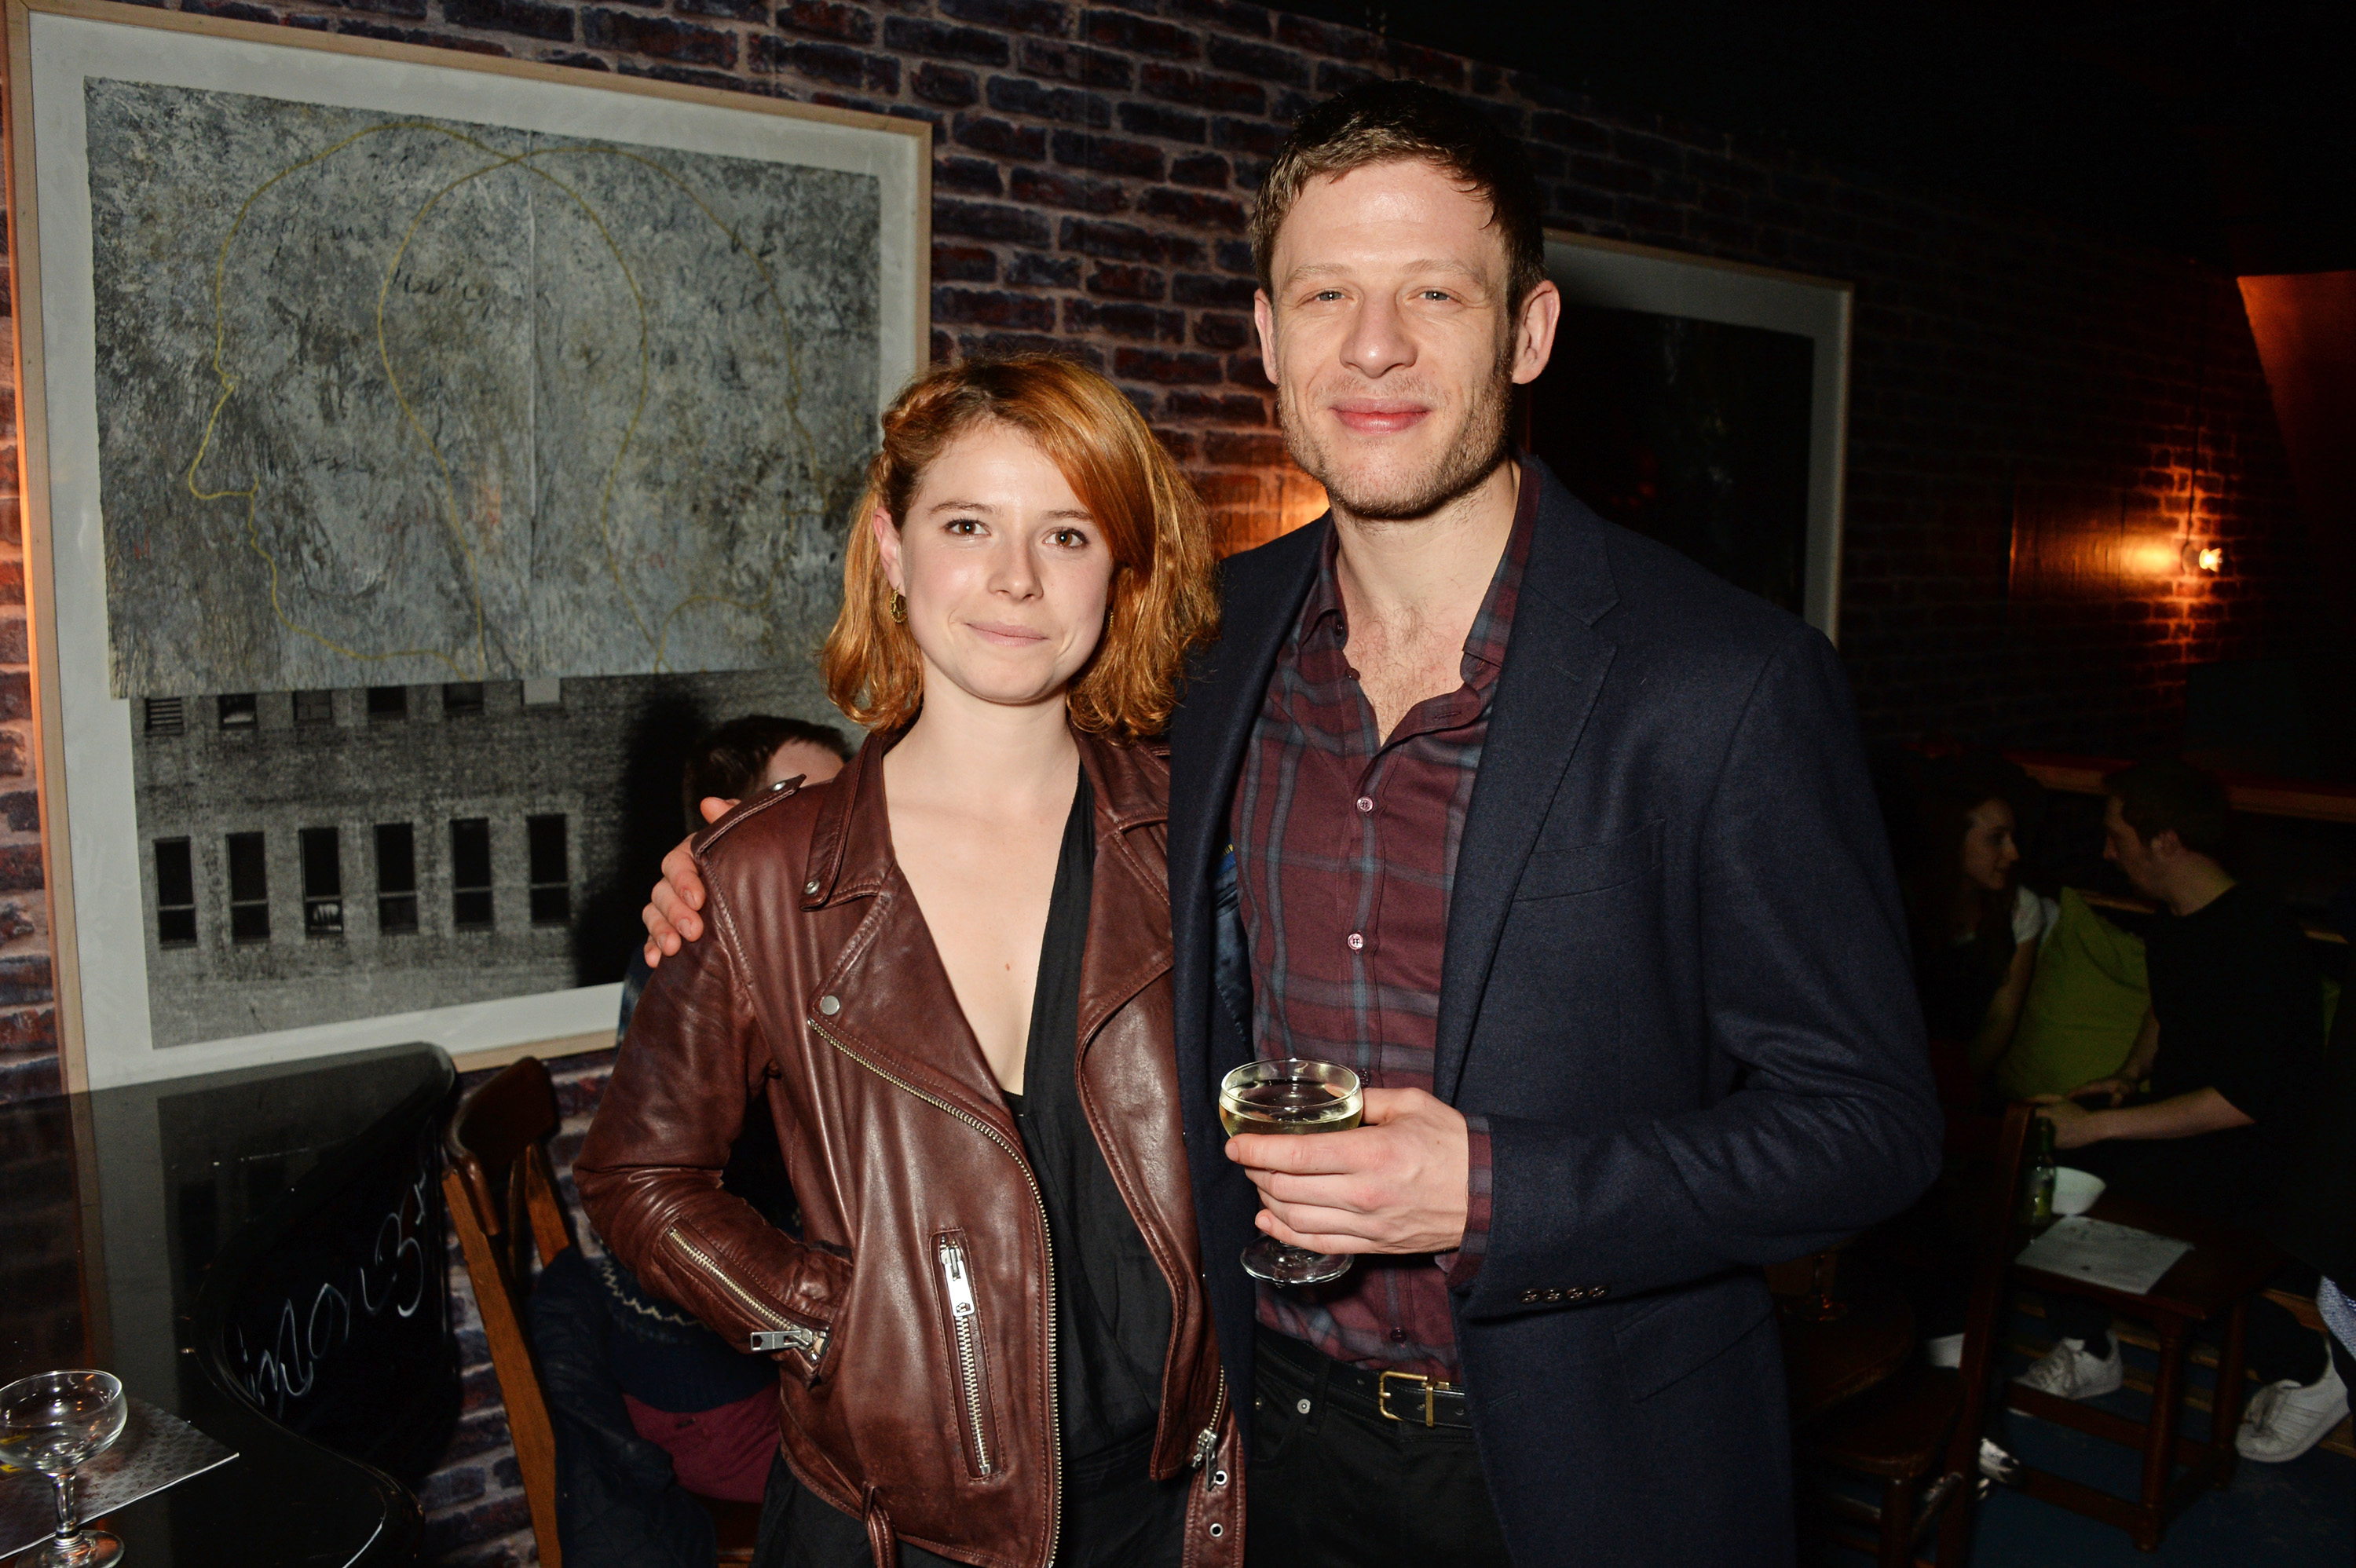 Jessie Buckley and James Norton attend the press night performance of "Bug" at Found111 on March 29, 2016, in London, England. | Source: Getty Images